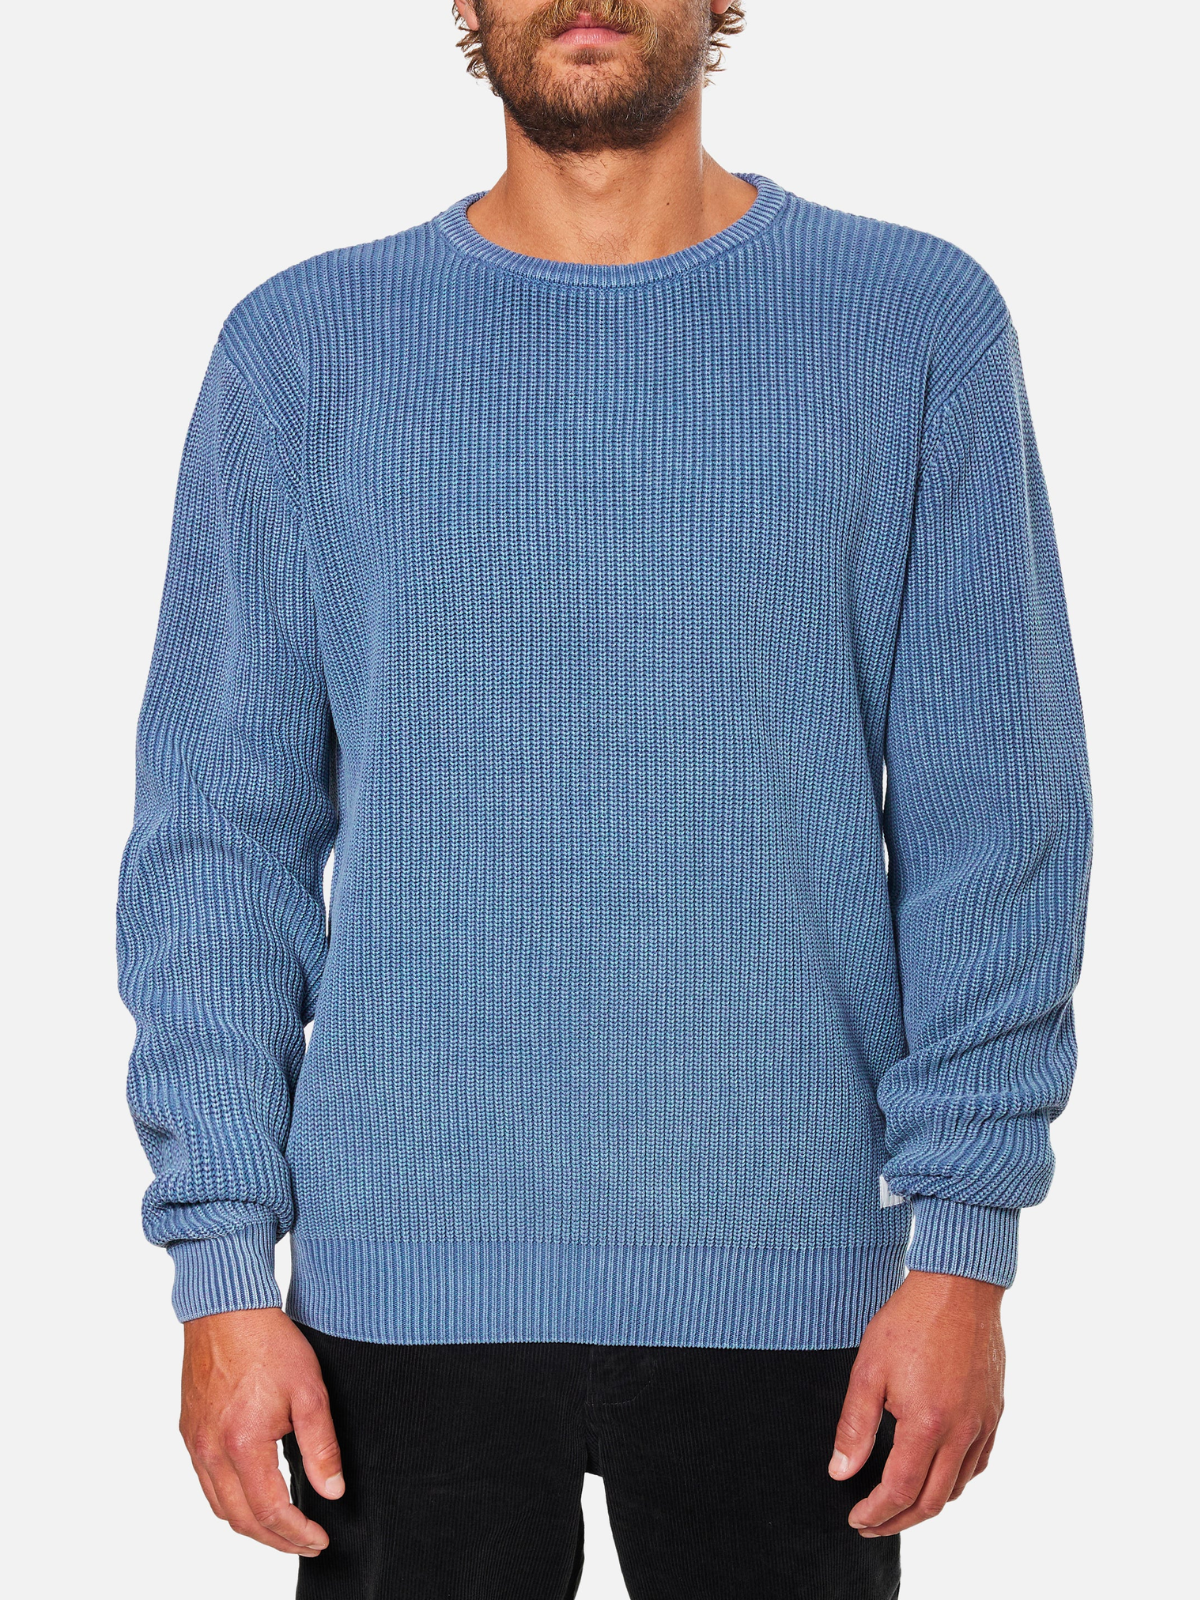 katin swell sweater washed blue cyan cable knit shaker stitch knit jumper crewneck ribbed cuff kempt athens ga georgia men's clothing store